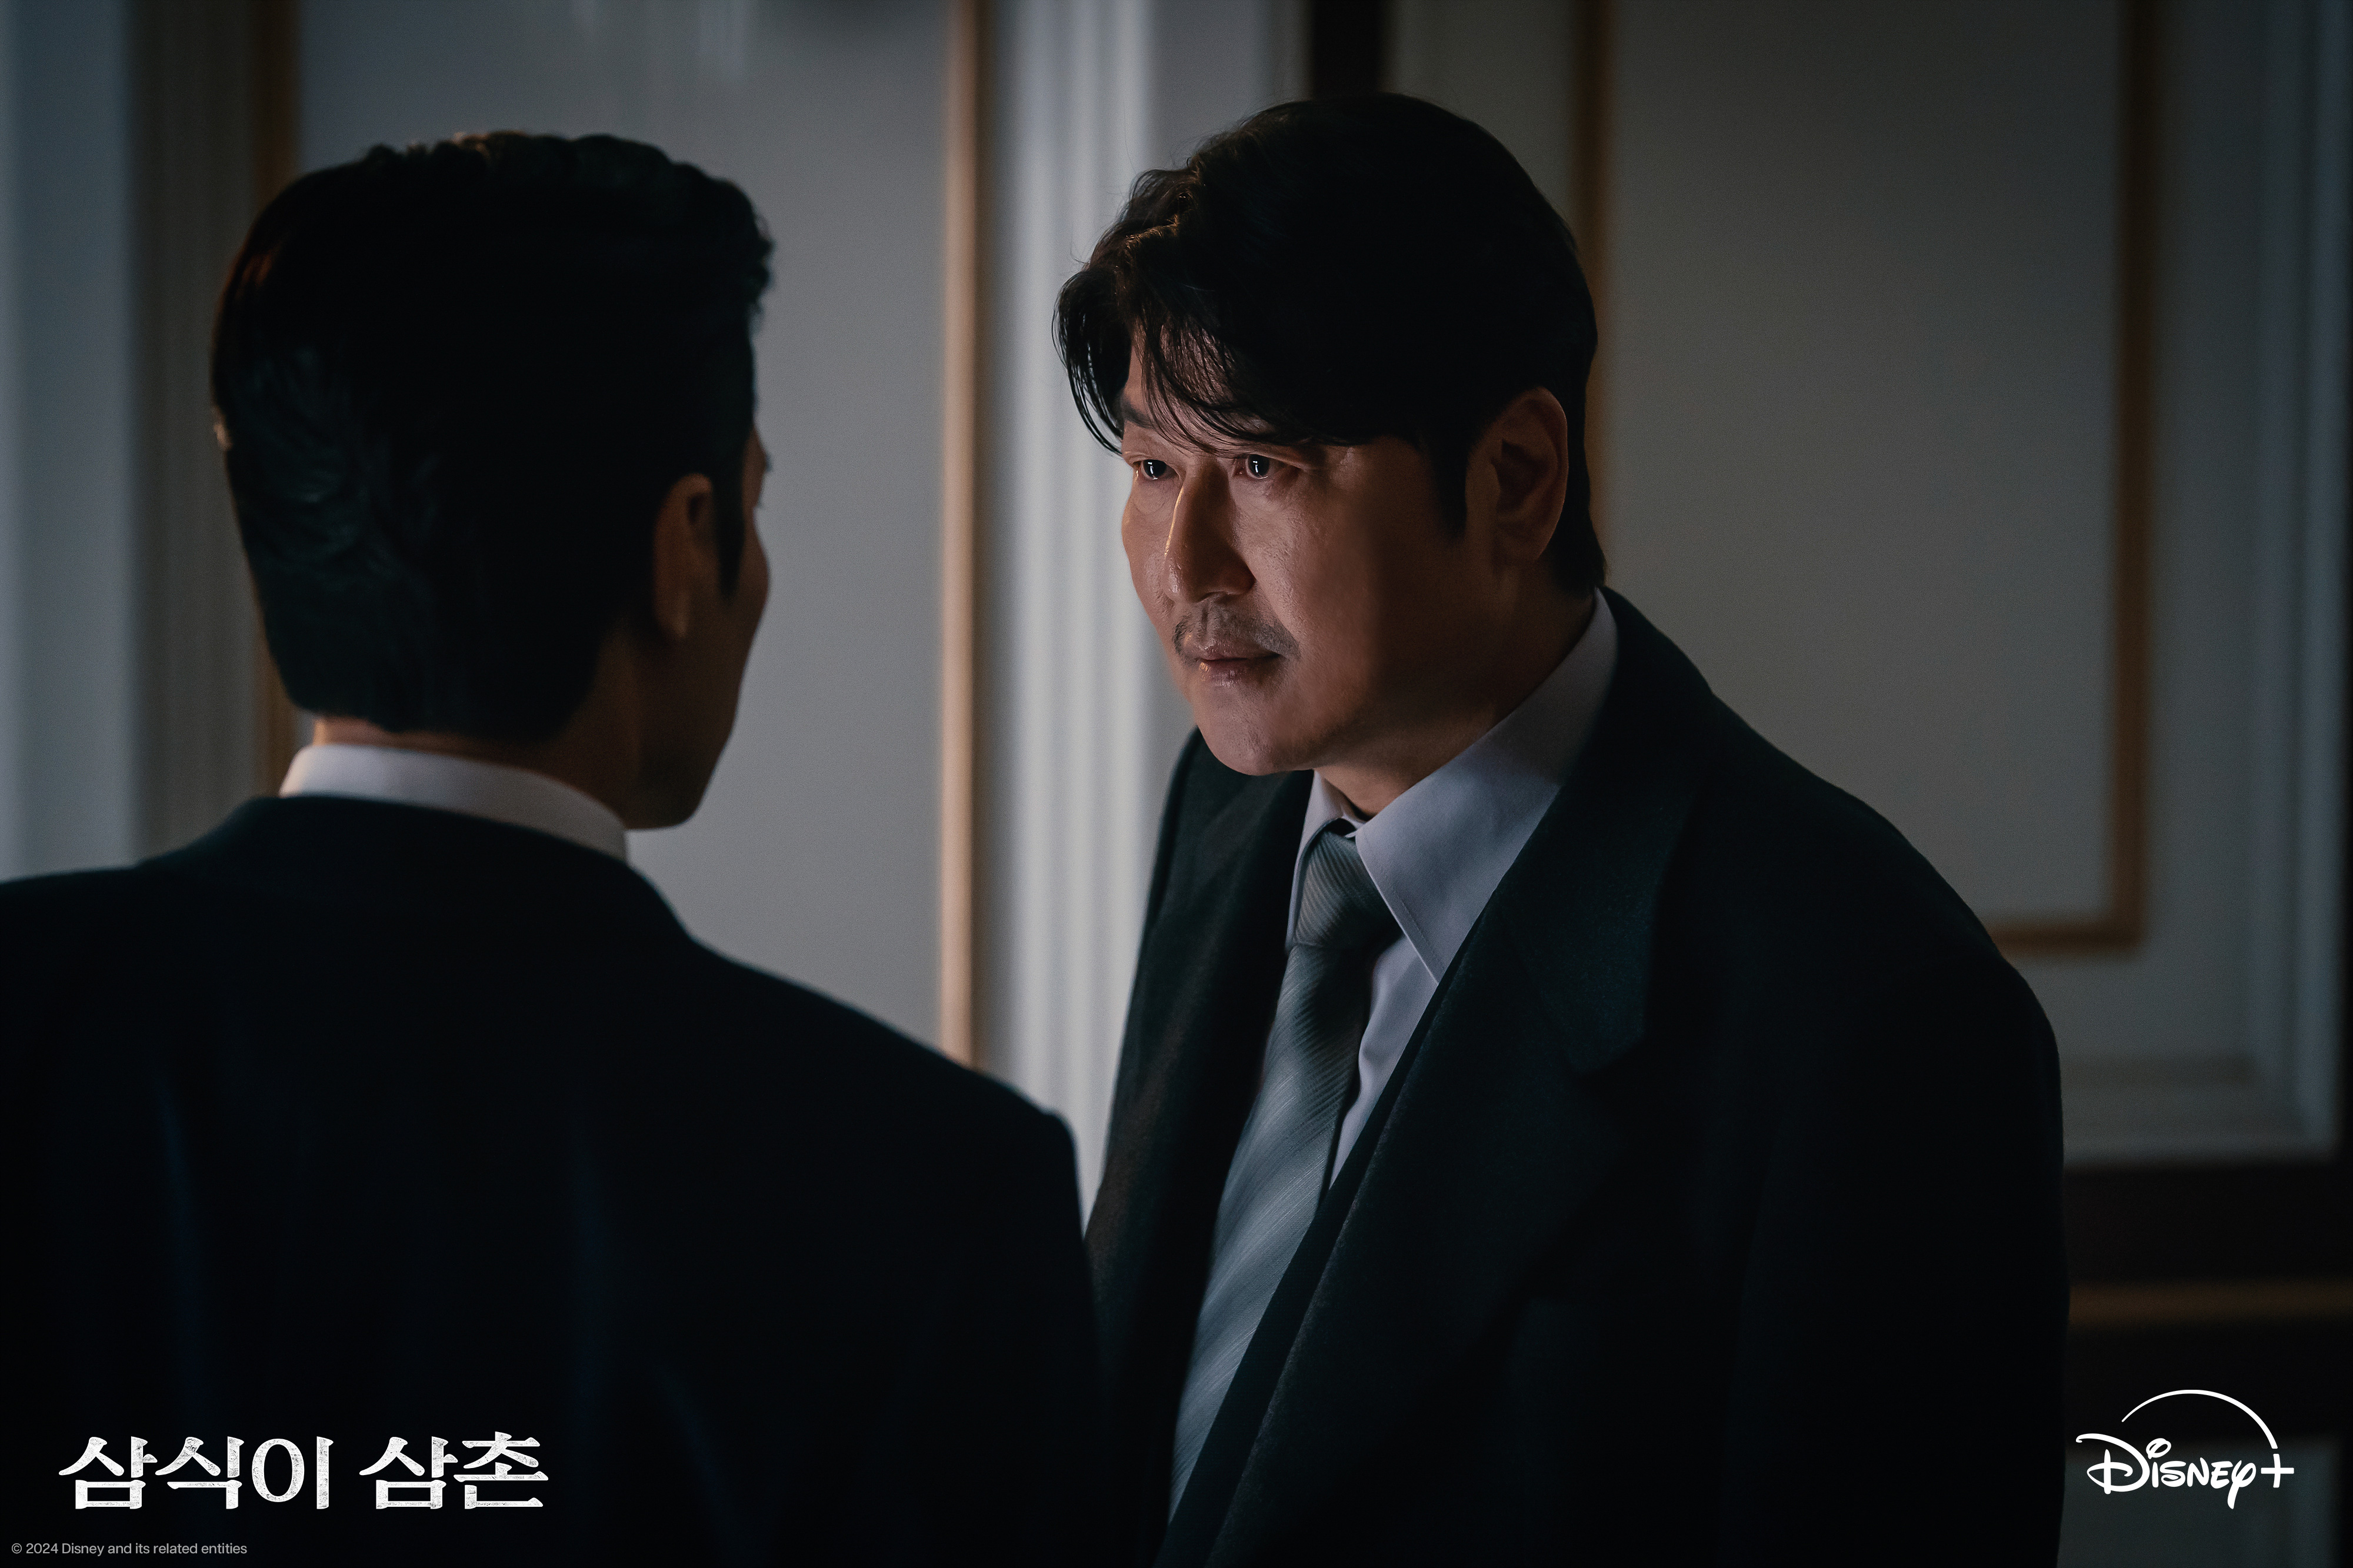 Song Kang Ho Is A Strategist Who Can Grasp Situations Quickly In Upcoming Drama 